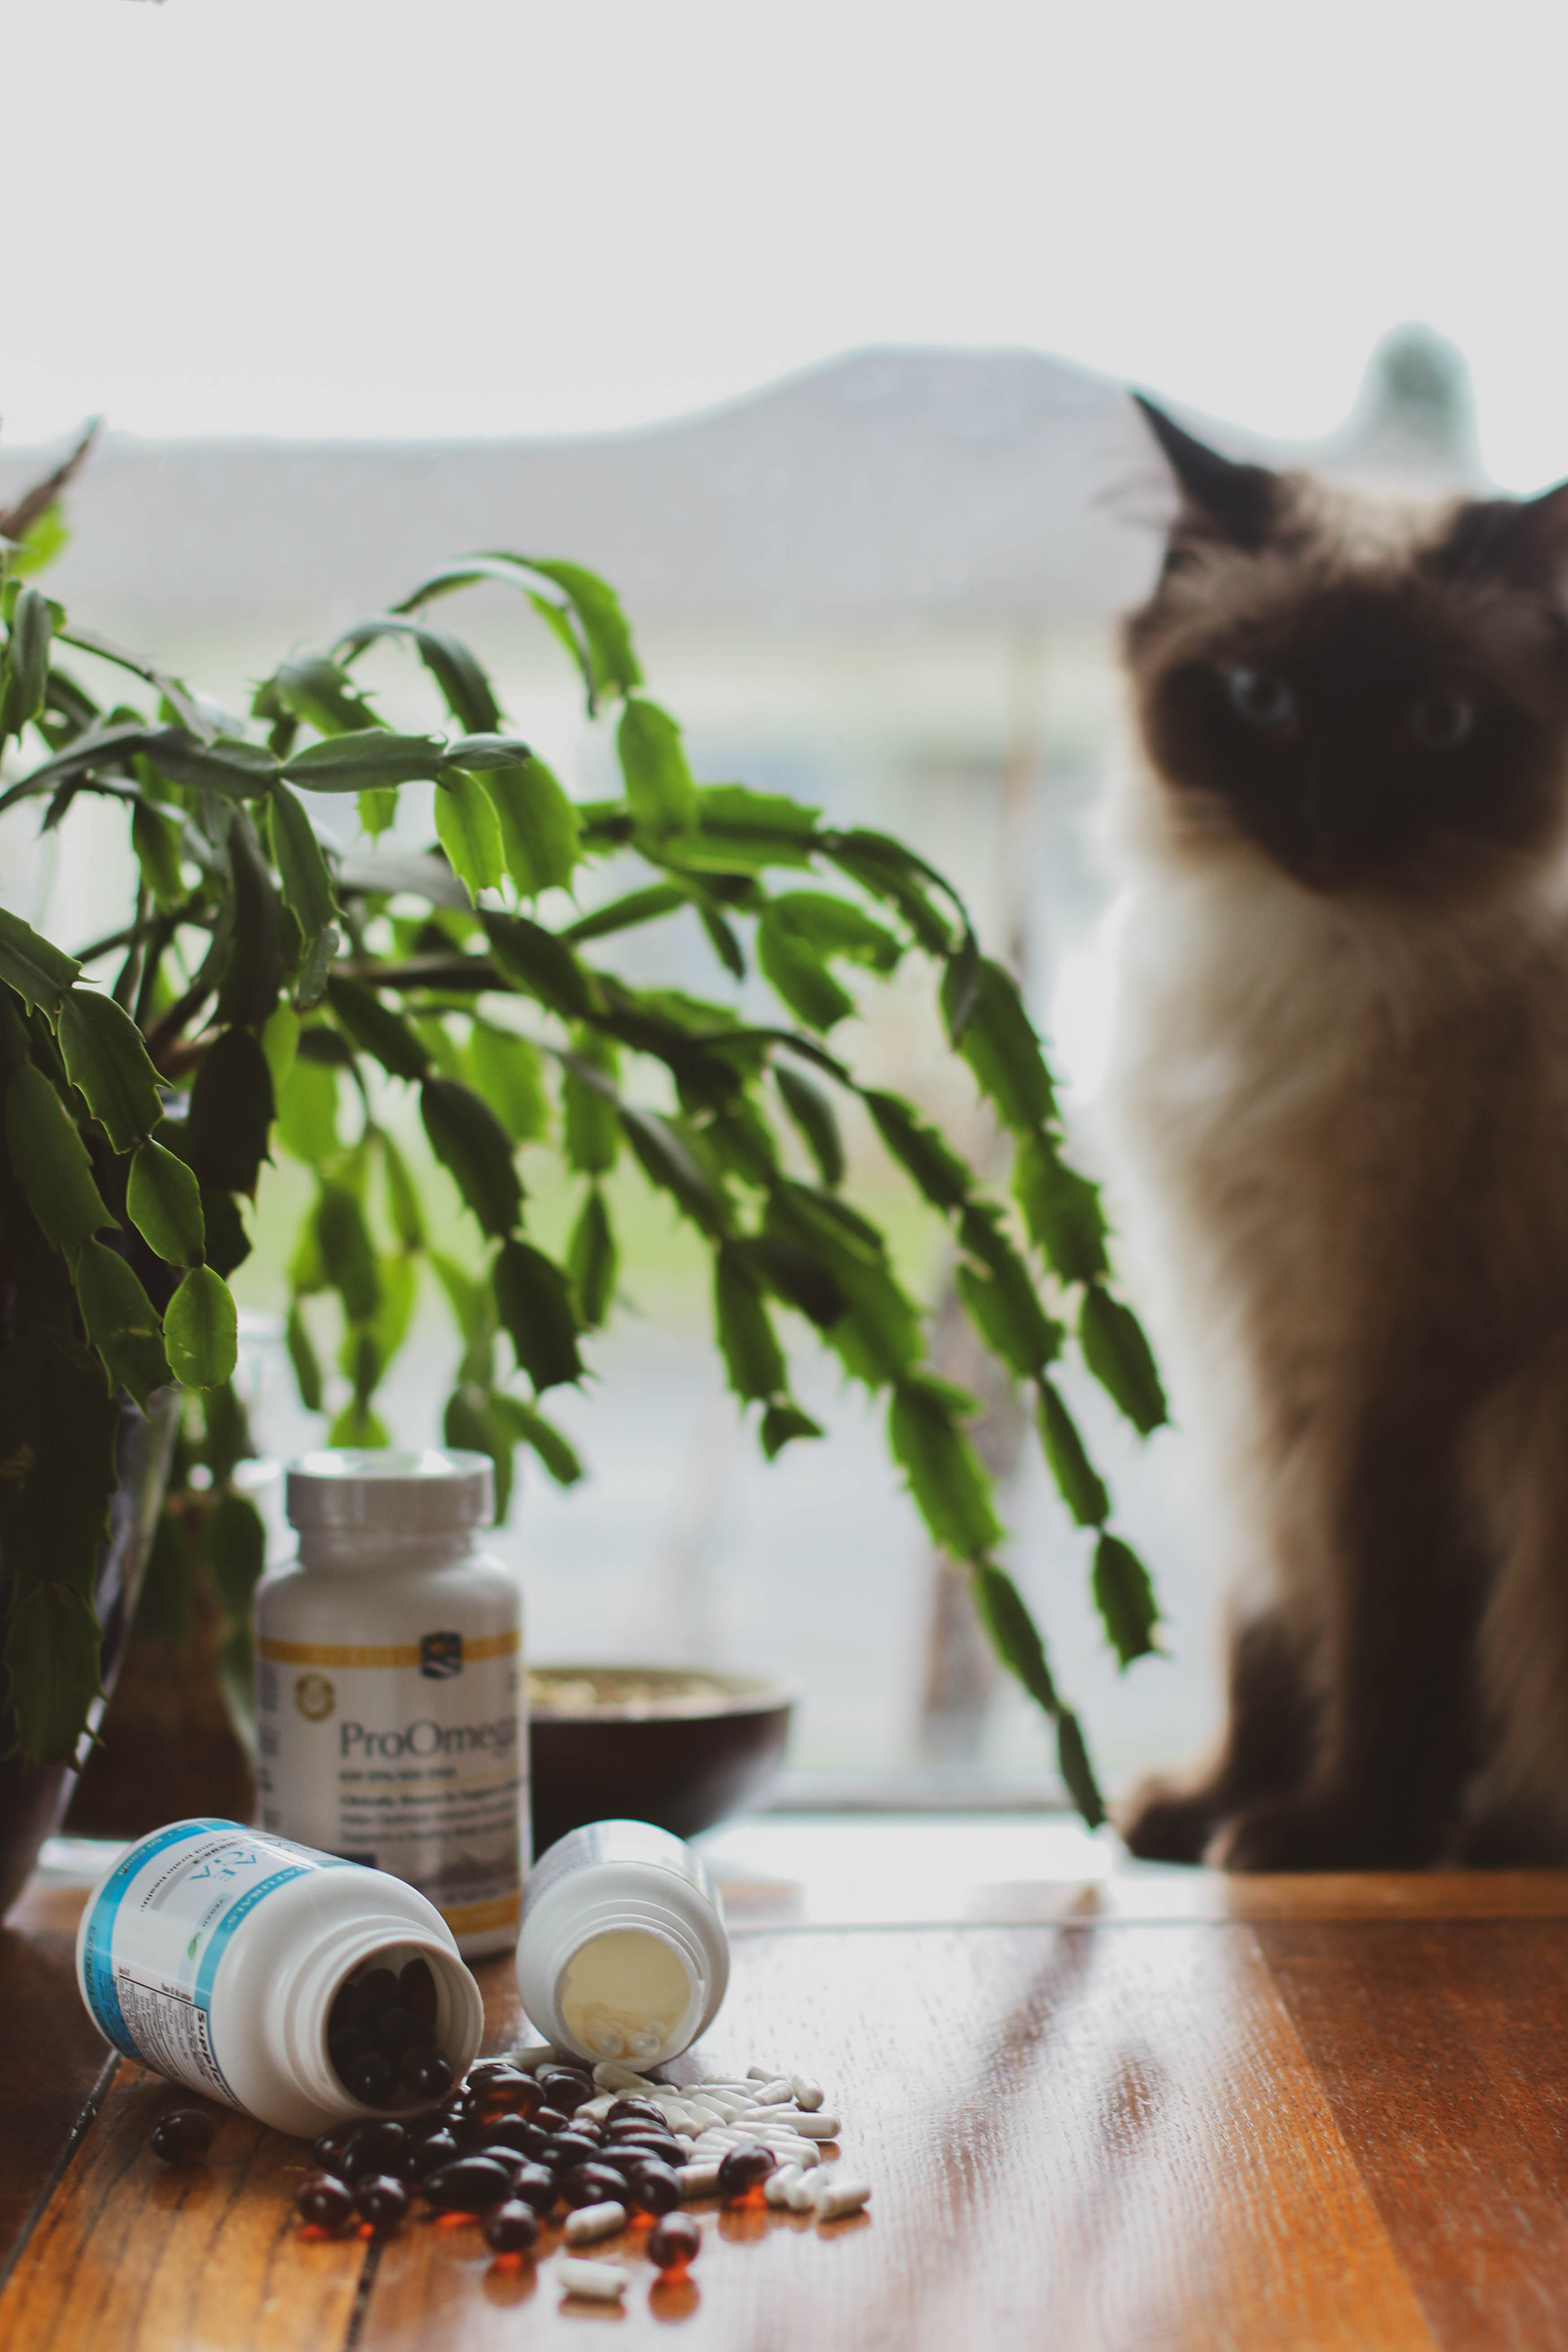 fish-oil-vitamin-d-and-other-supplements-for-season-depression-on-table-with-christmas-cactus-and-siamese-cat-near-window